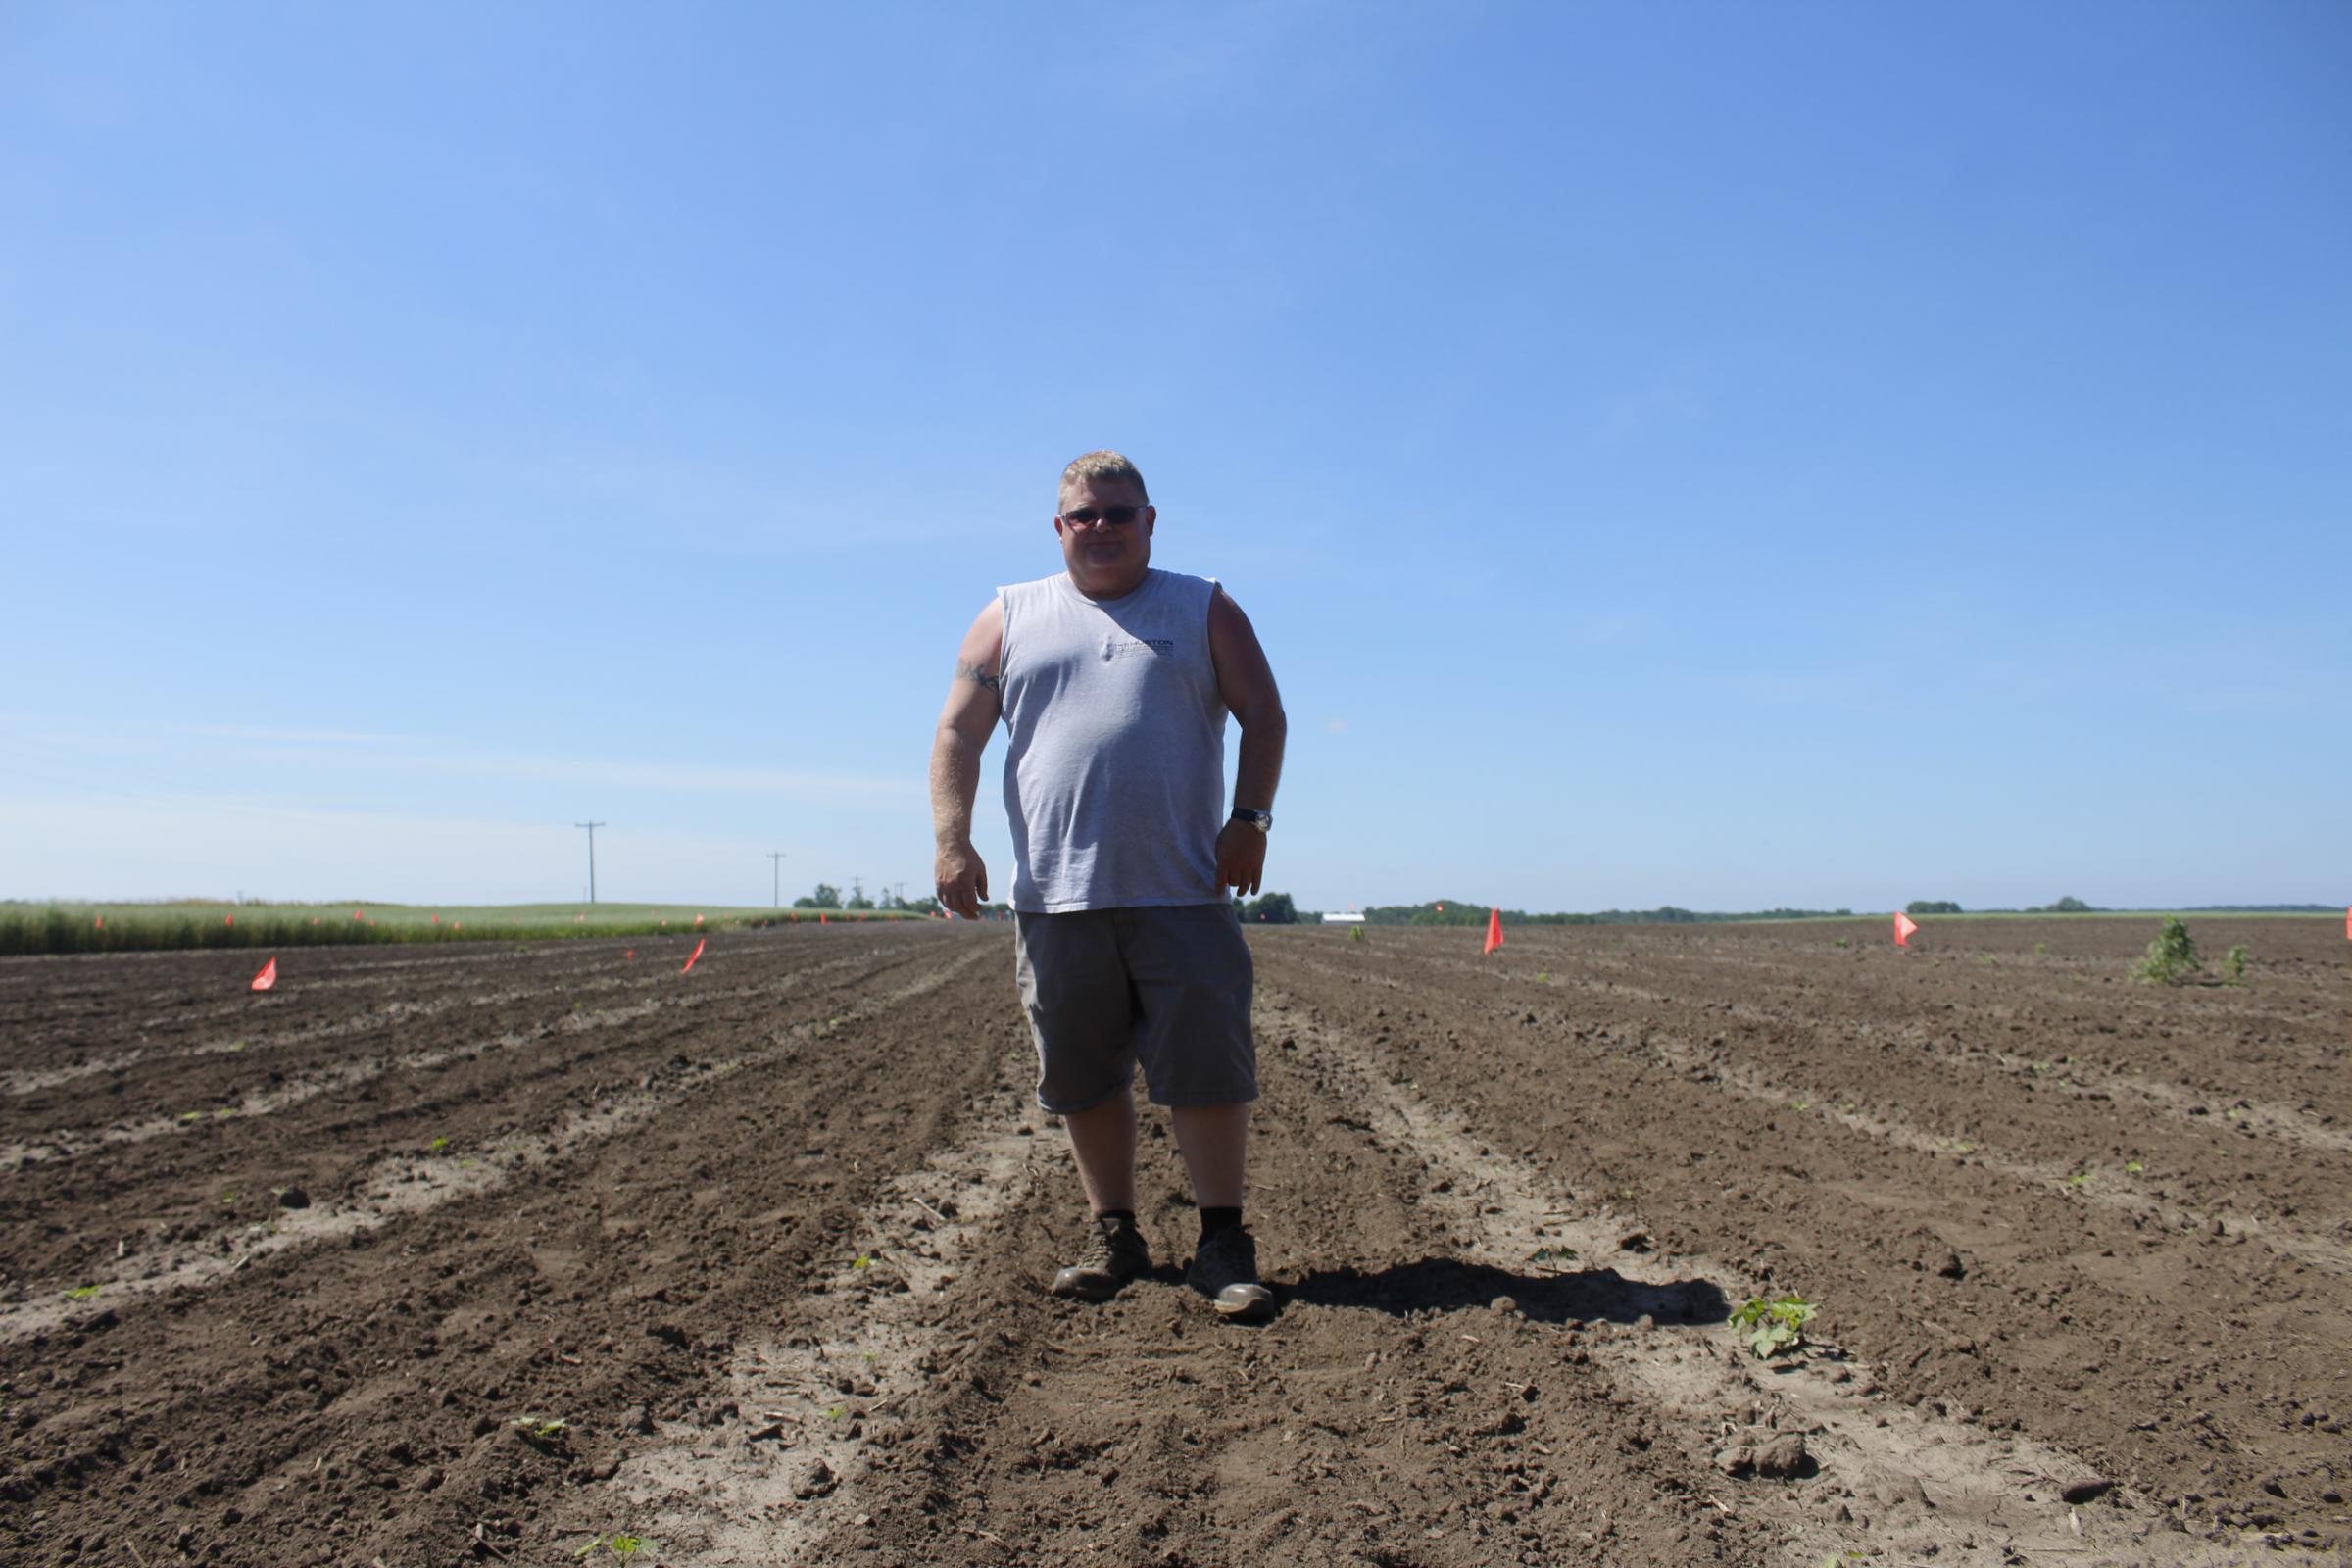 A big white guy in a sleeveless t-shirt standing in the middle of a plowed field with blue sky.